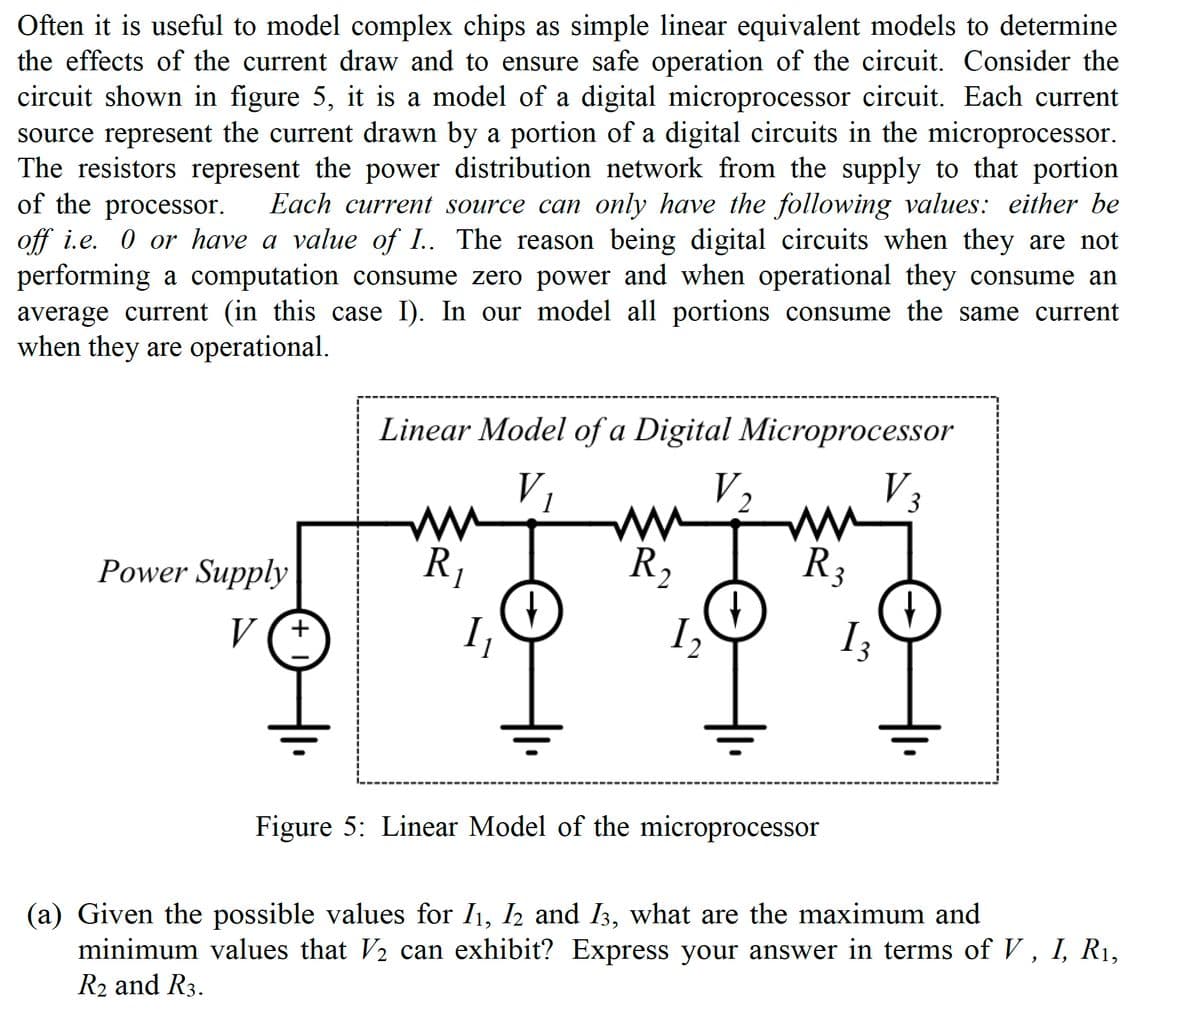 Often it is useful to model complex chips as simple linear equivalent models to determine
the effects of the current draw and to ensure safe operation of the circuit. Consider the
circuit shown in figure 5, it is a model of a digital microprocessor circuit. Each current
source represent the current drawn by a portion of a digital circuits in the microprocessor.
The resistors represent the power distribution network from the supply to that portion
of the processor.
Each current source can only have the following values: either be
off i.e. 0 or have a value of I.. The reason being digital circuits when they are not
performing a computation consume zero power and when operational they consume an
average current (in this case I). In our model all portions consume the same current
when they are operational.
Power Supply
V (+
Linear Model of a Digital Microprocessor
V₁
ww
R₁
1
I₁
mm
R₂
2
1₂
V₂
→
ни
R3
Figure 5: Linear Model of the microprocessor
13
3
(a) Given the possible values for I1, I2 and 13, what are the maximum and
minimum values that V/2 can exhibit? Express your answer in terms of V, I, R₁,
R₂ and R3.